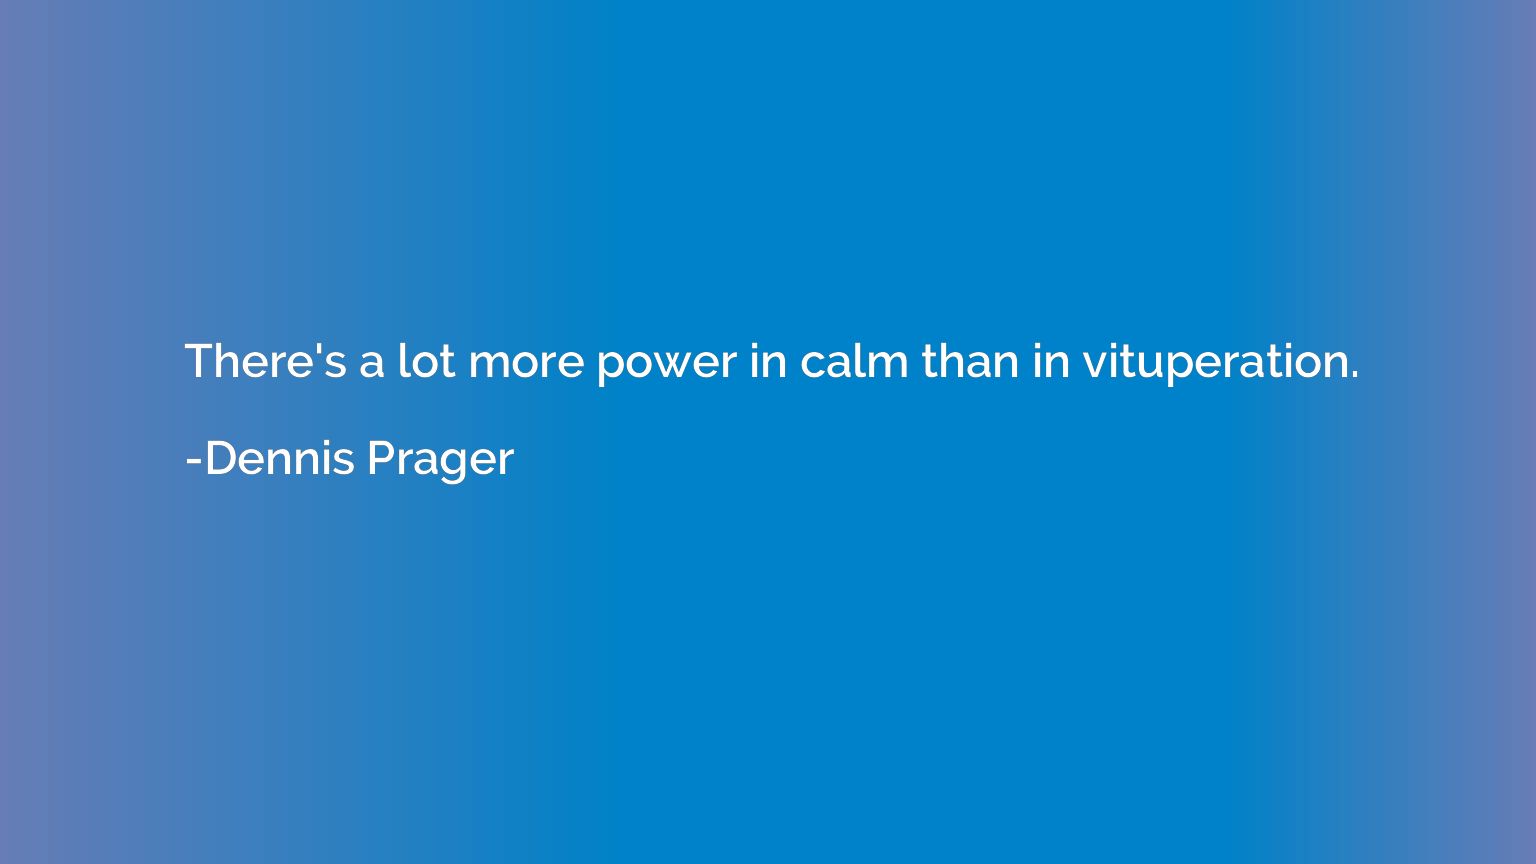 There's a lot more power in calm than in vituperation.